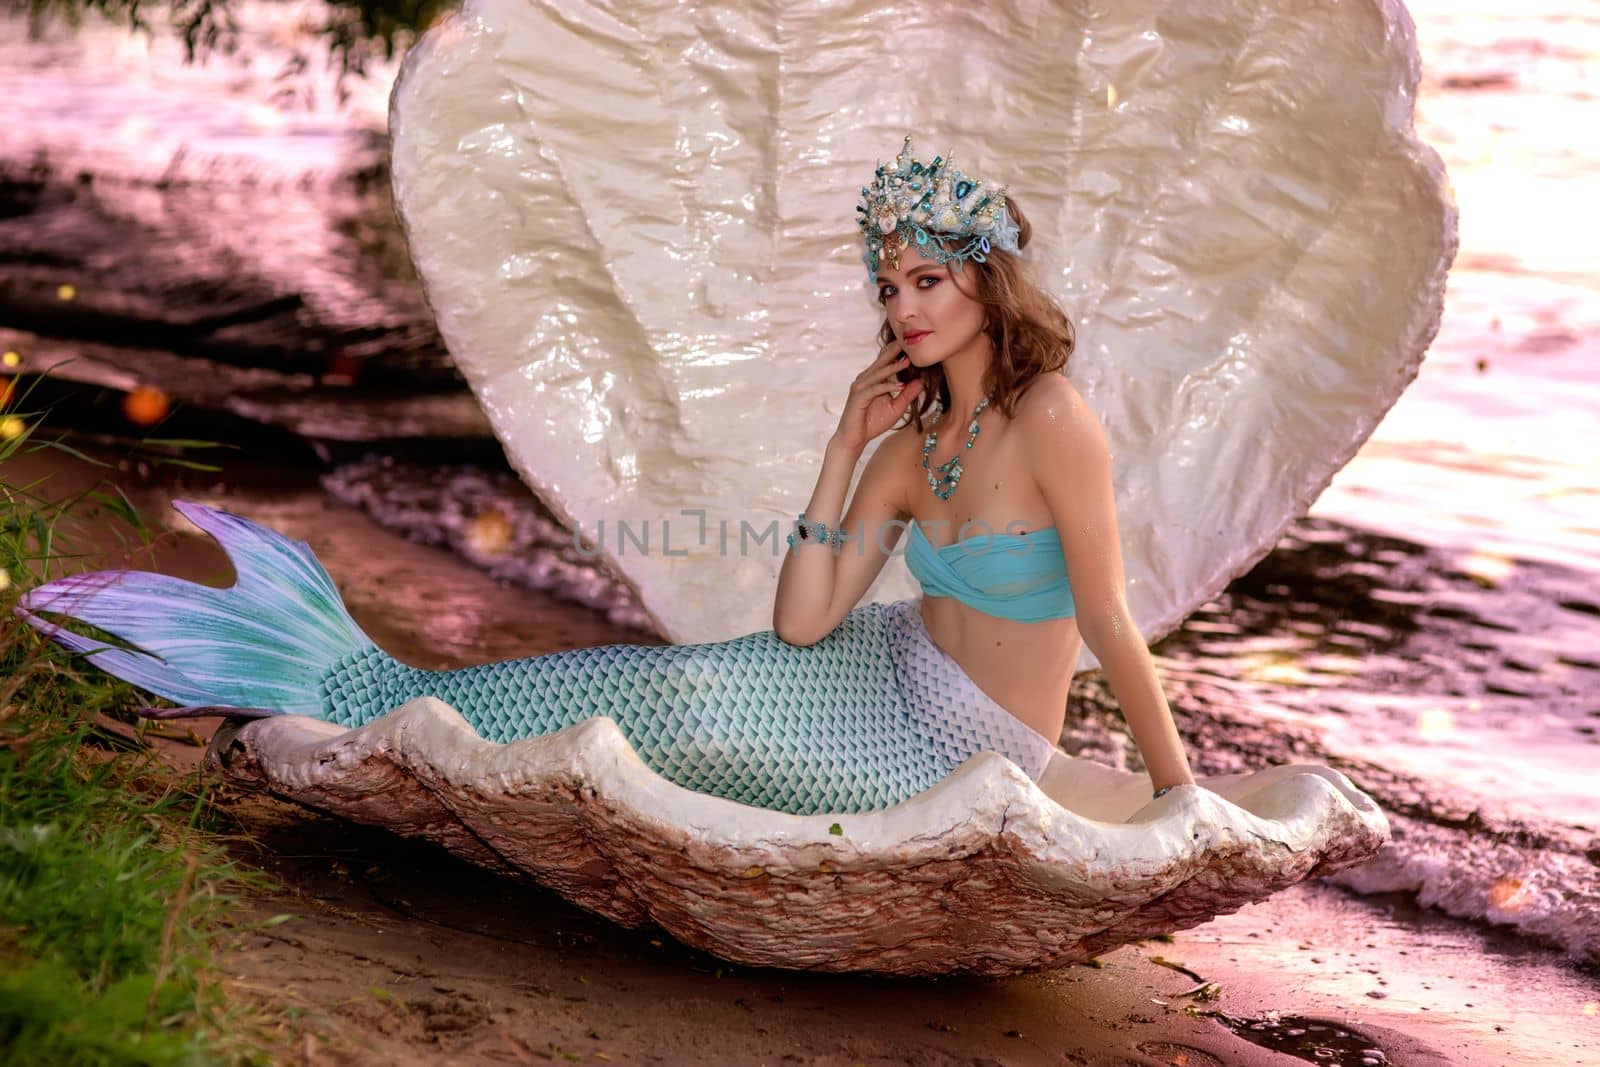 A mermaid girl in a beautiful diadem sits by the water in a large white shell